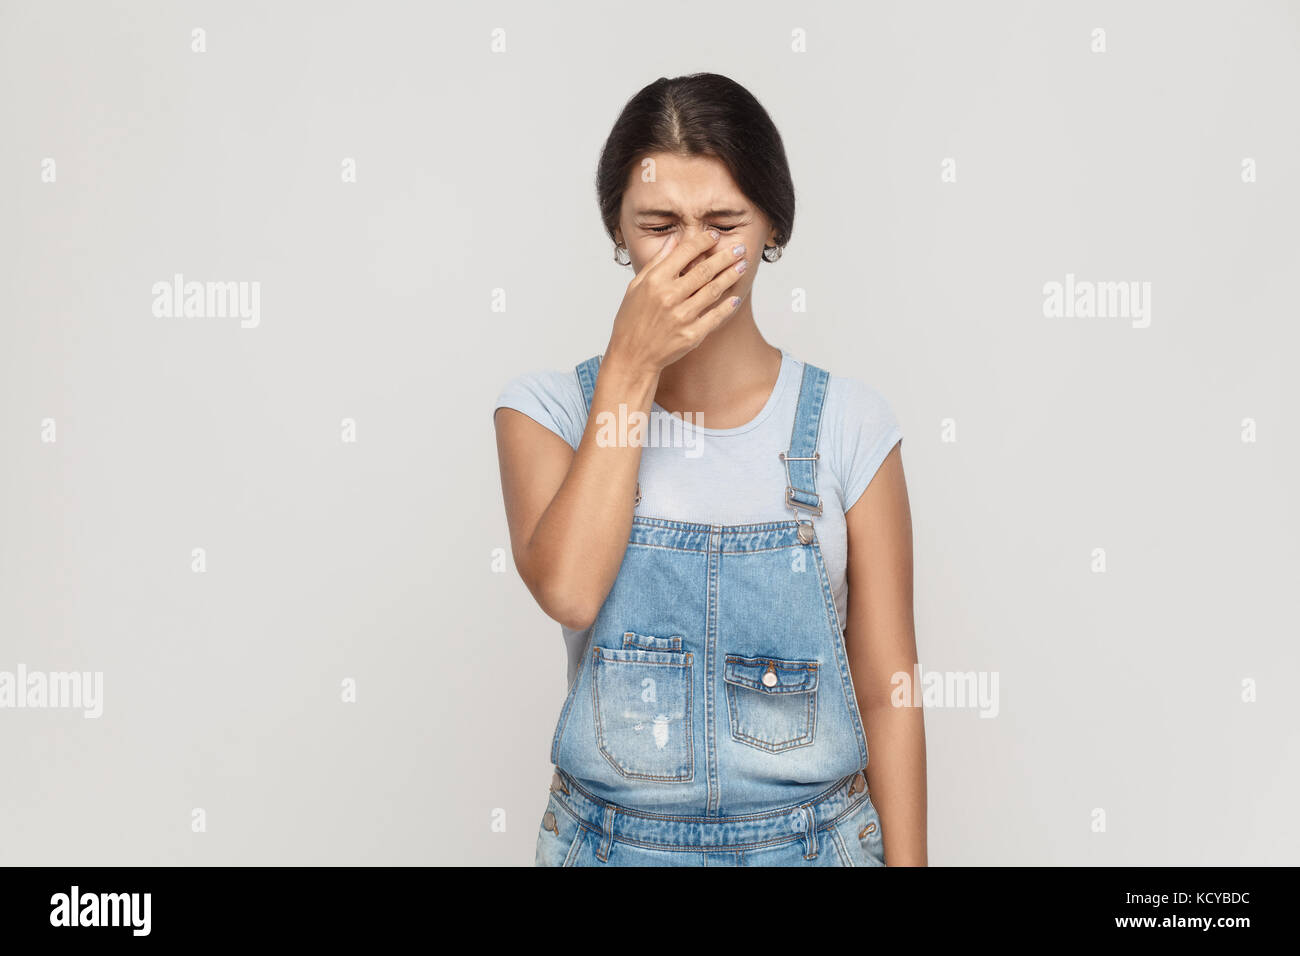 Unhappy and depressed young adult  gypsy woman, feeling ashamed or sick, covering face with both hands, keeping eyes closed. Isolated studio shot on g Stock Photo